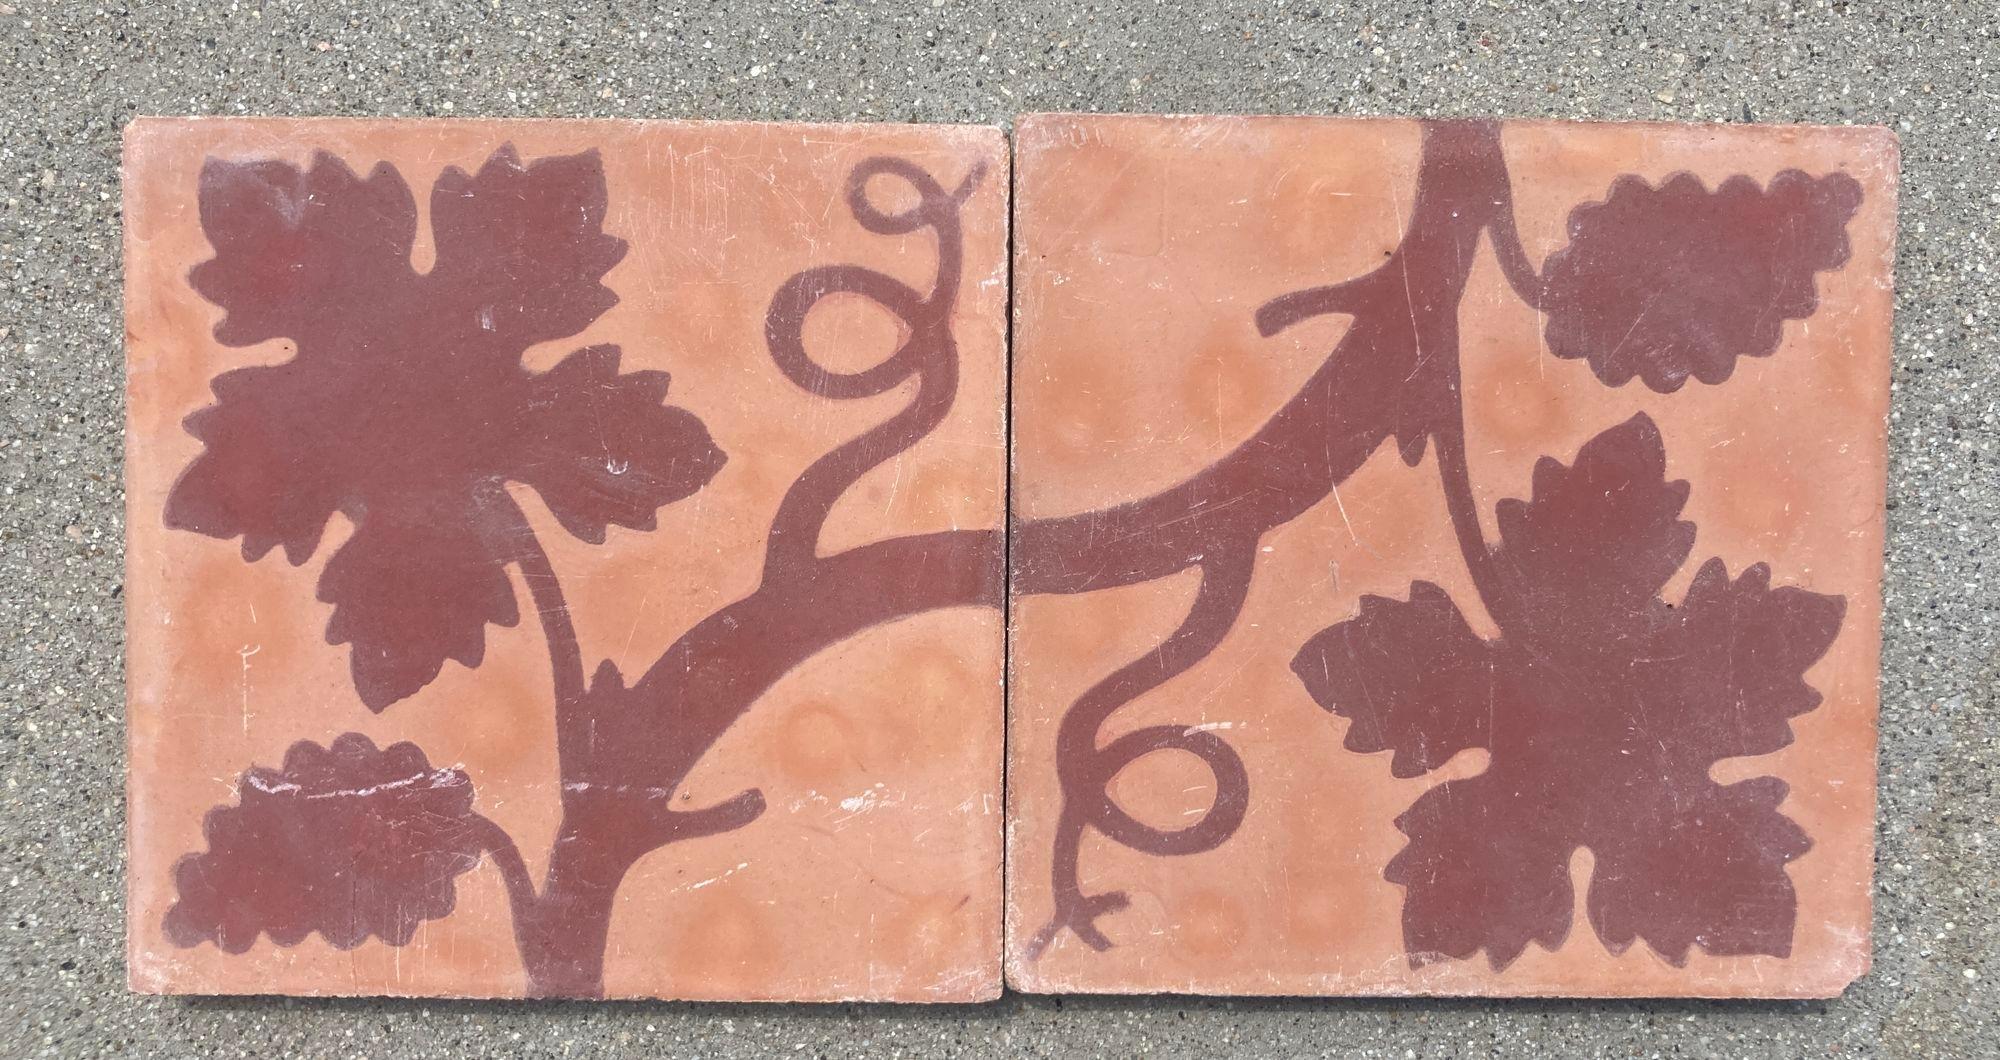 Moroccan handcrafted and hand-painted cement tiles with traditional Marrakech ochre and red colors.
These are authentic Moroccan reclaimed encaustic tiles hand made by artisans in Fez Morocco.
These are handmade cement tiles many variations in